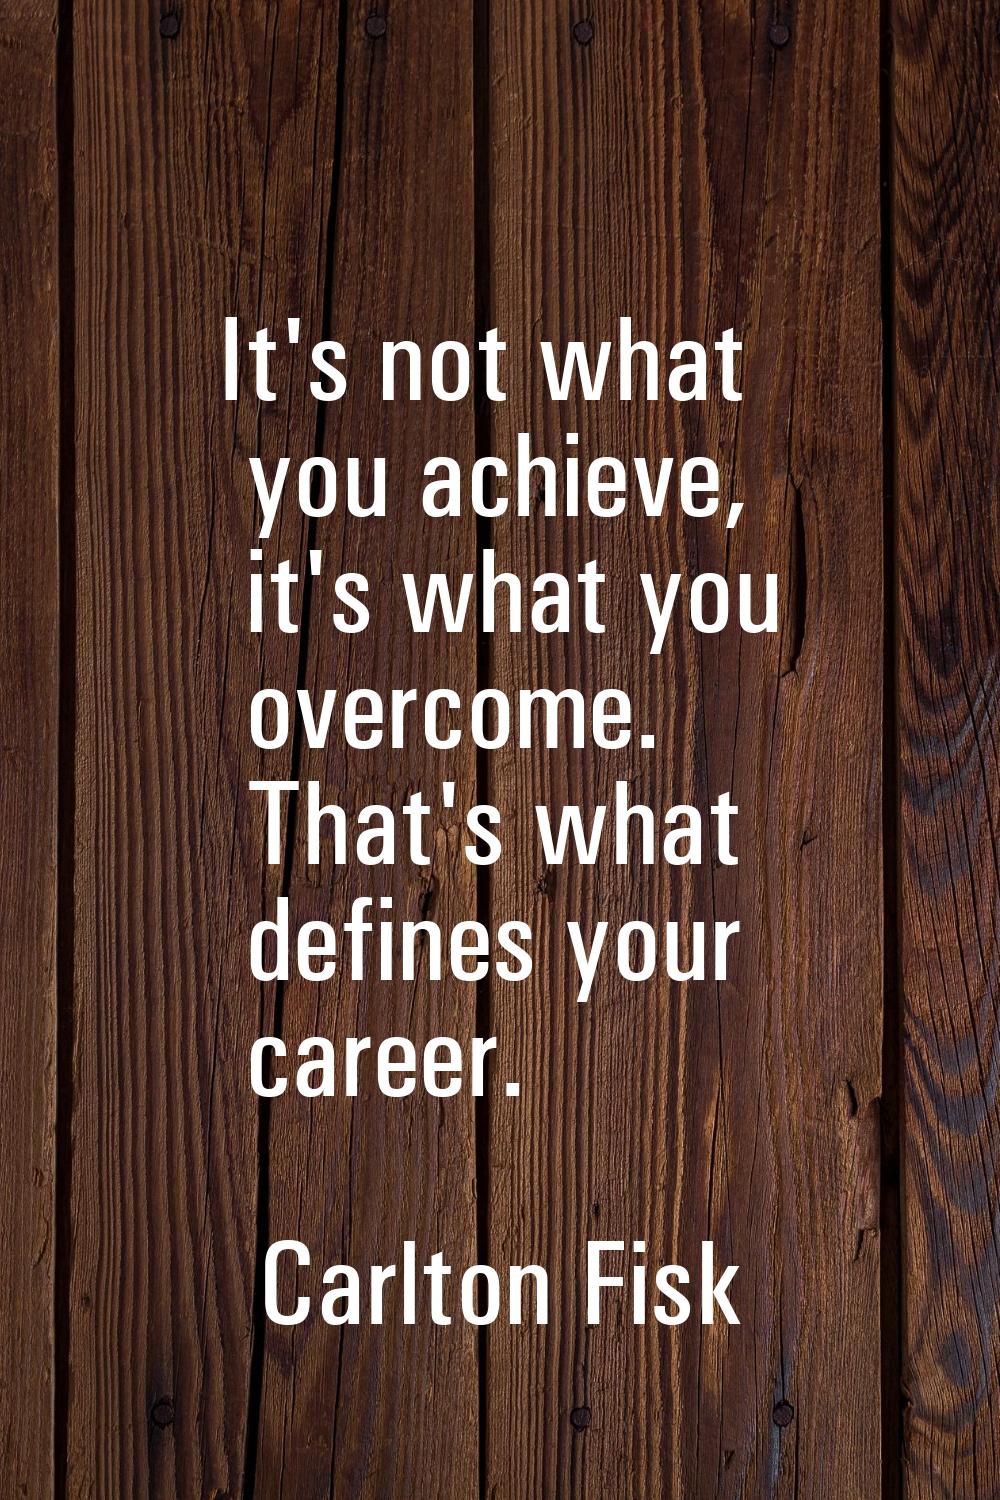 It's not what you achieve, it's what you overcome. That's what defines your career.